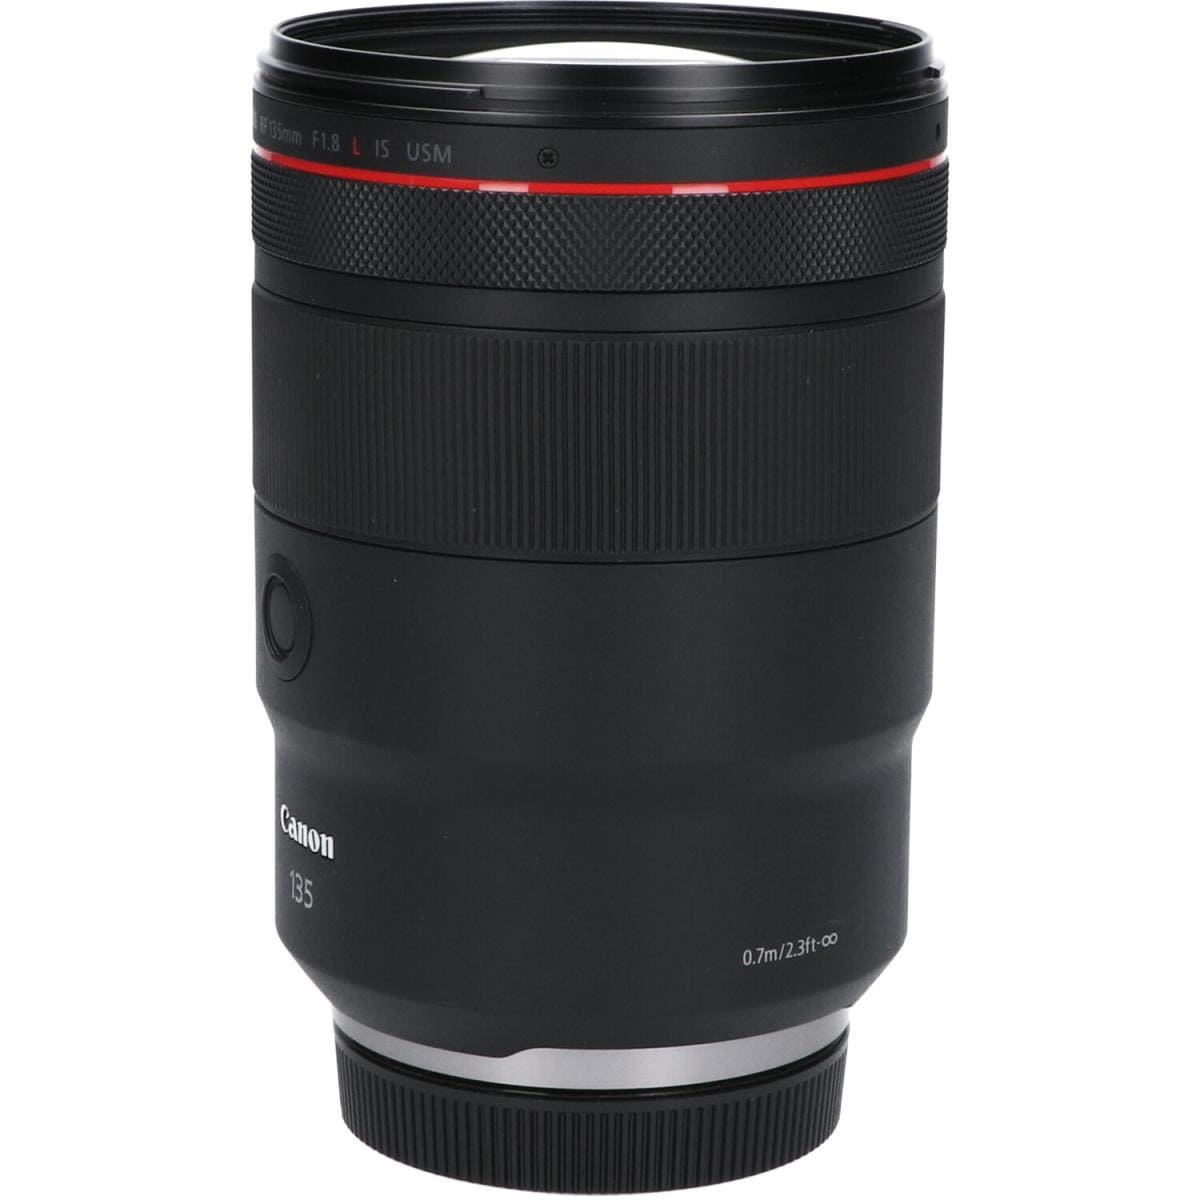 CANON RF135mm F1.8L IS USM